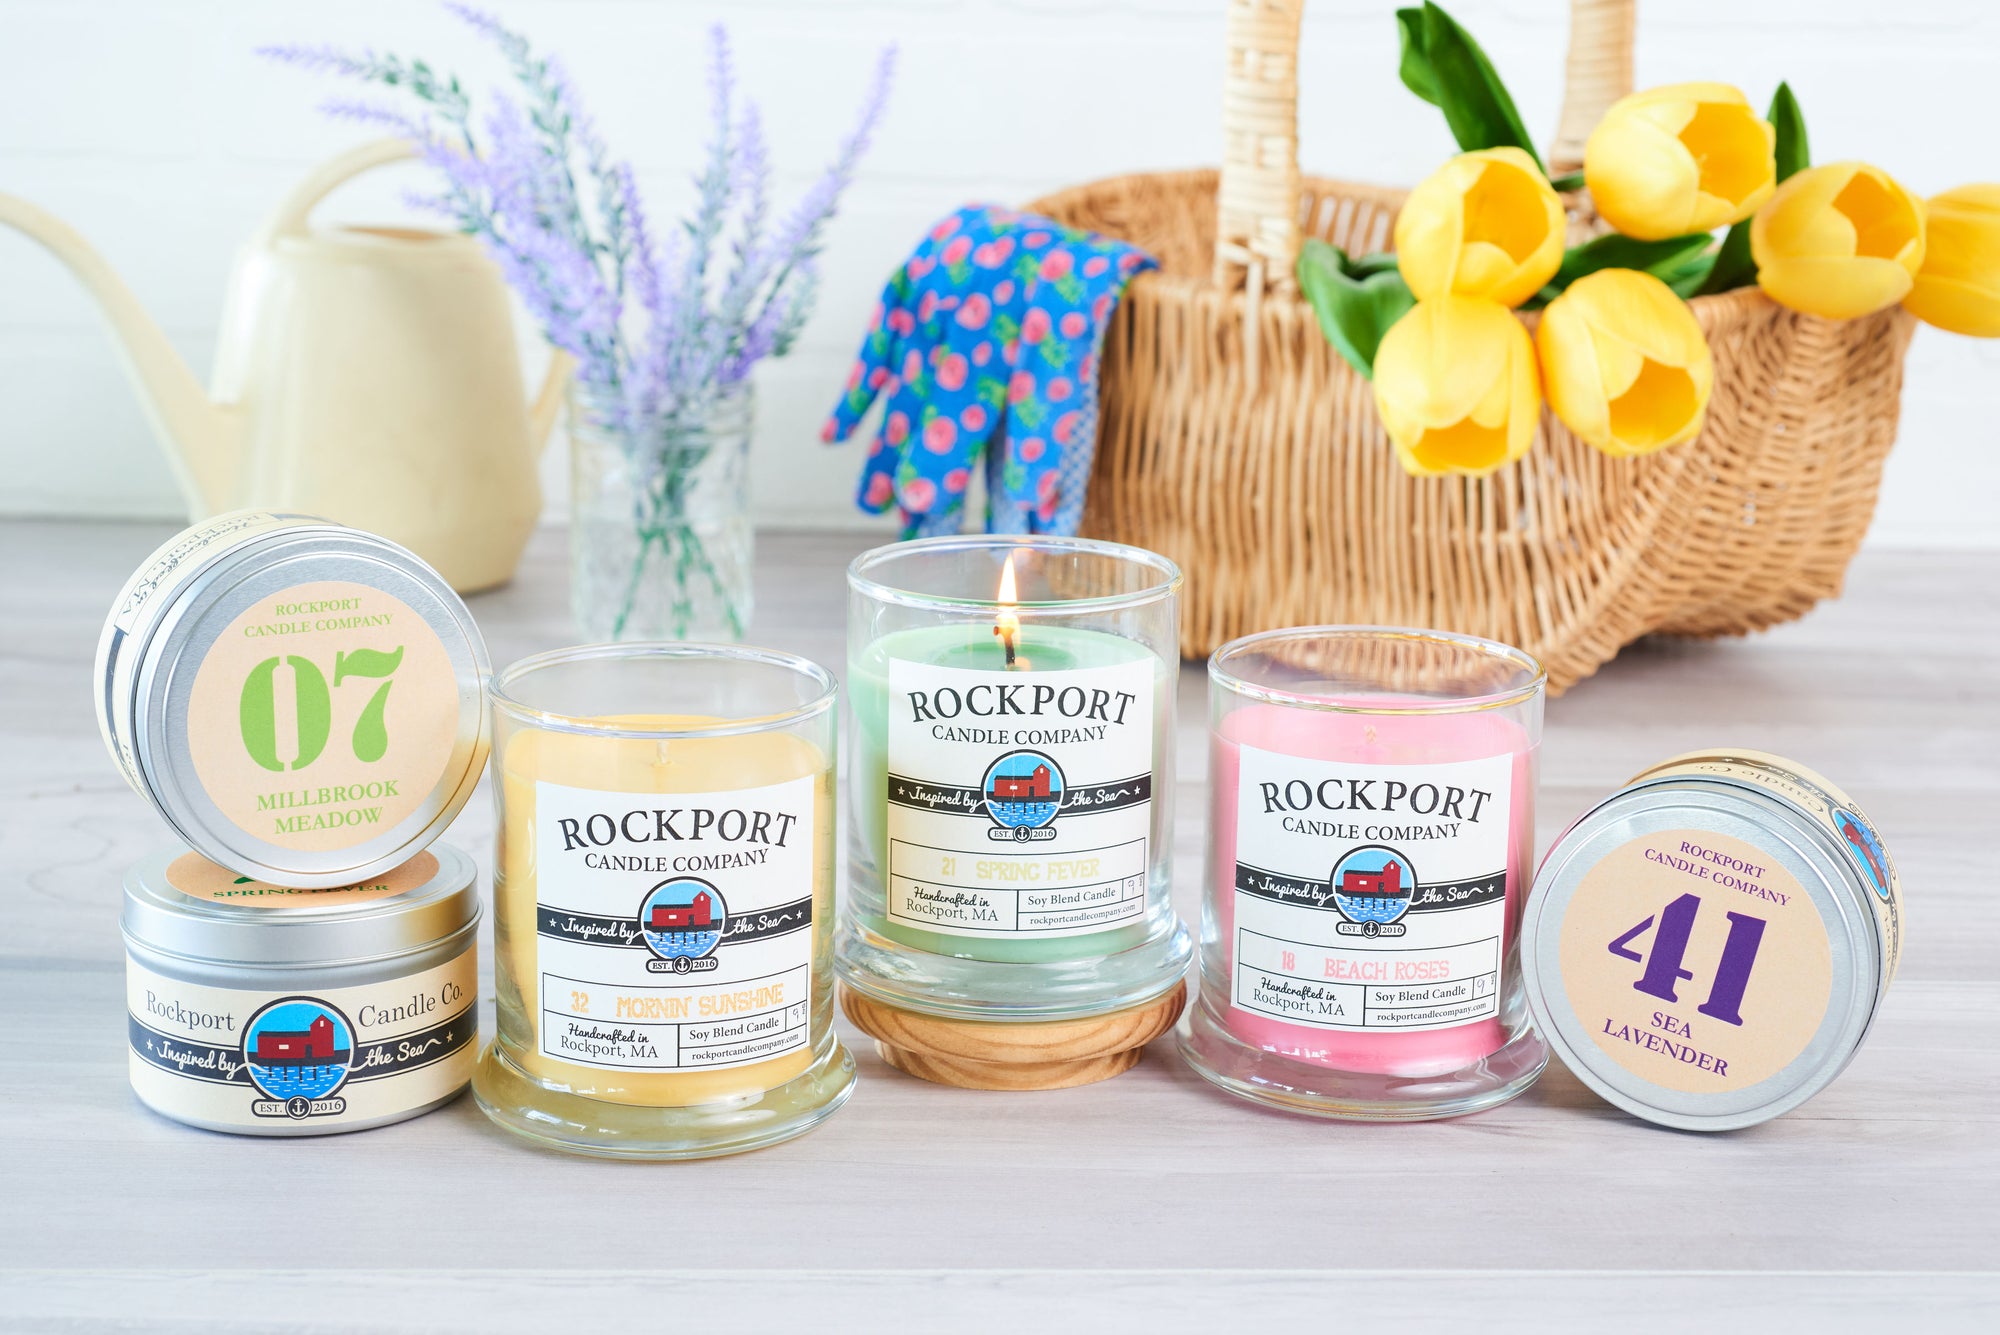 Spring candle scents by Rockport Candle Company